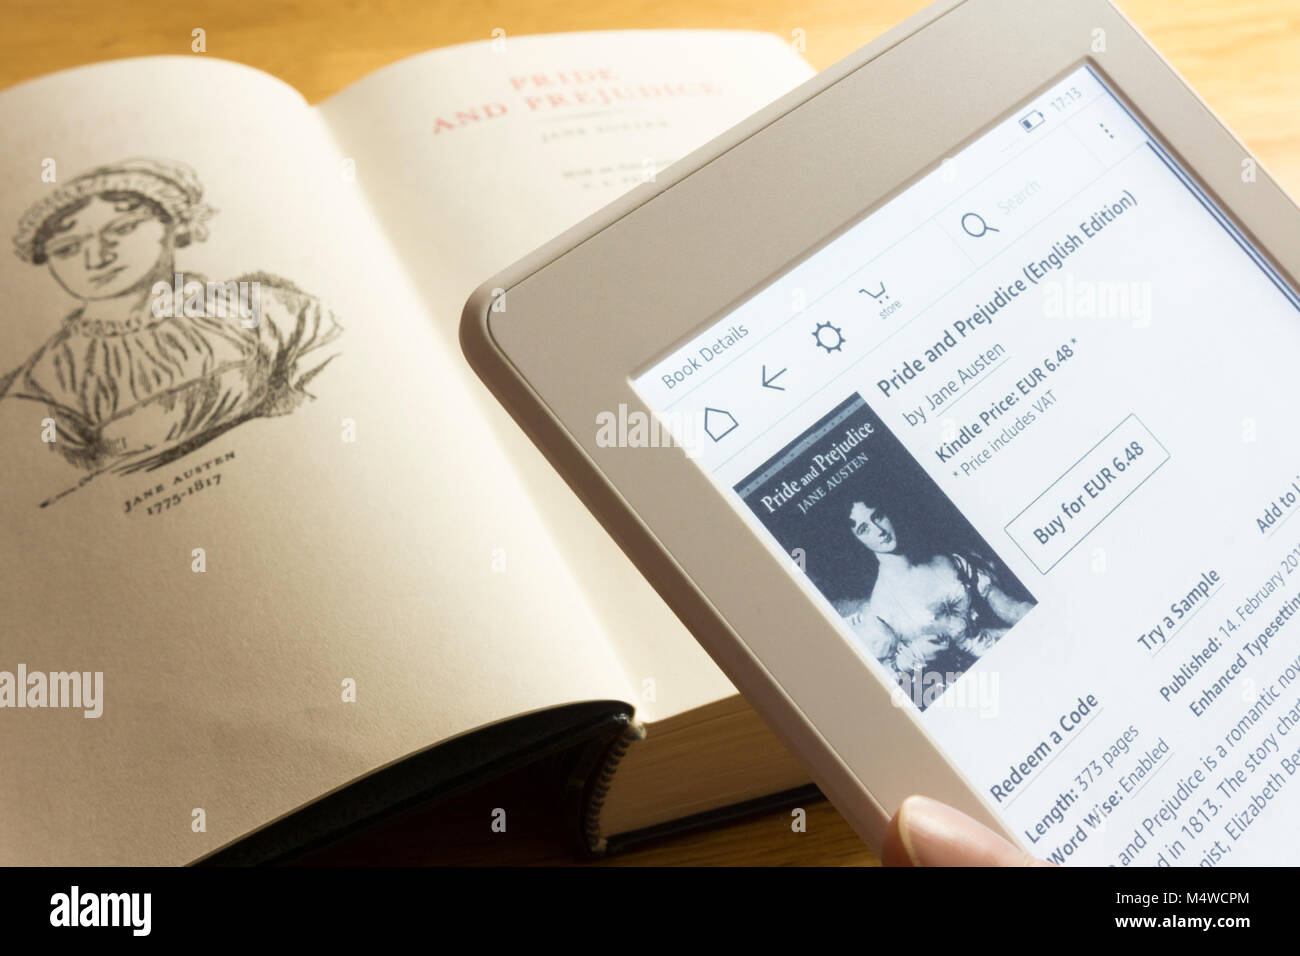 A kindle paperwhite with an Ebook version of Pride and Prejudice and a hardback book copy Stock Photo